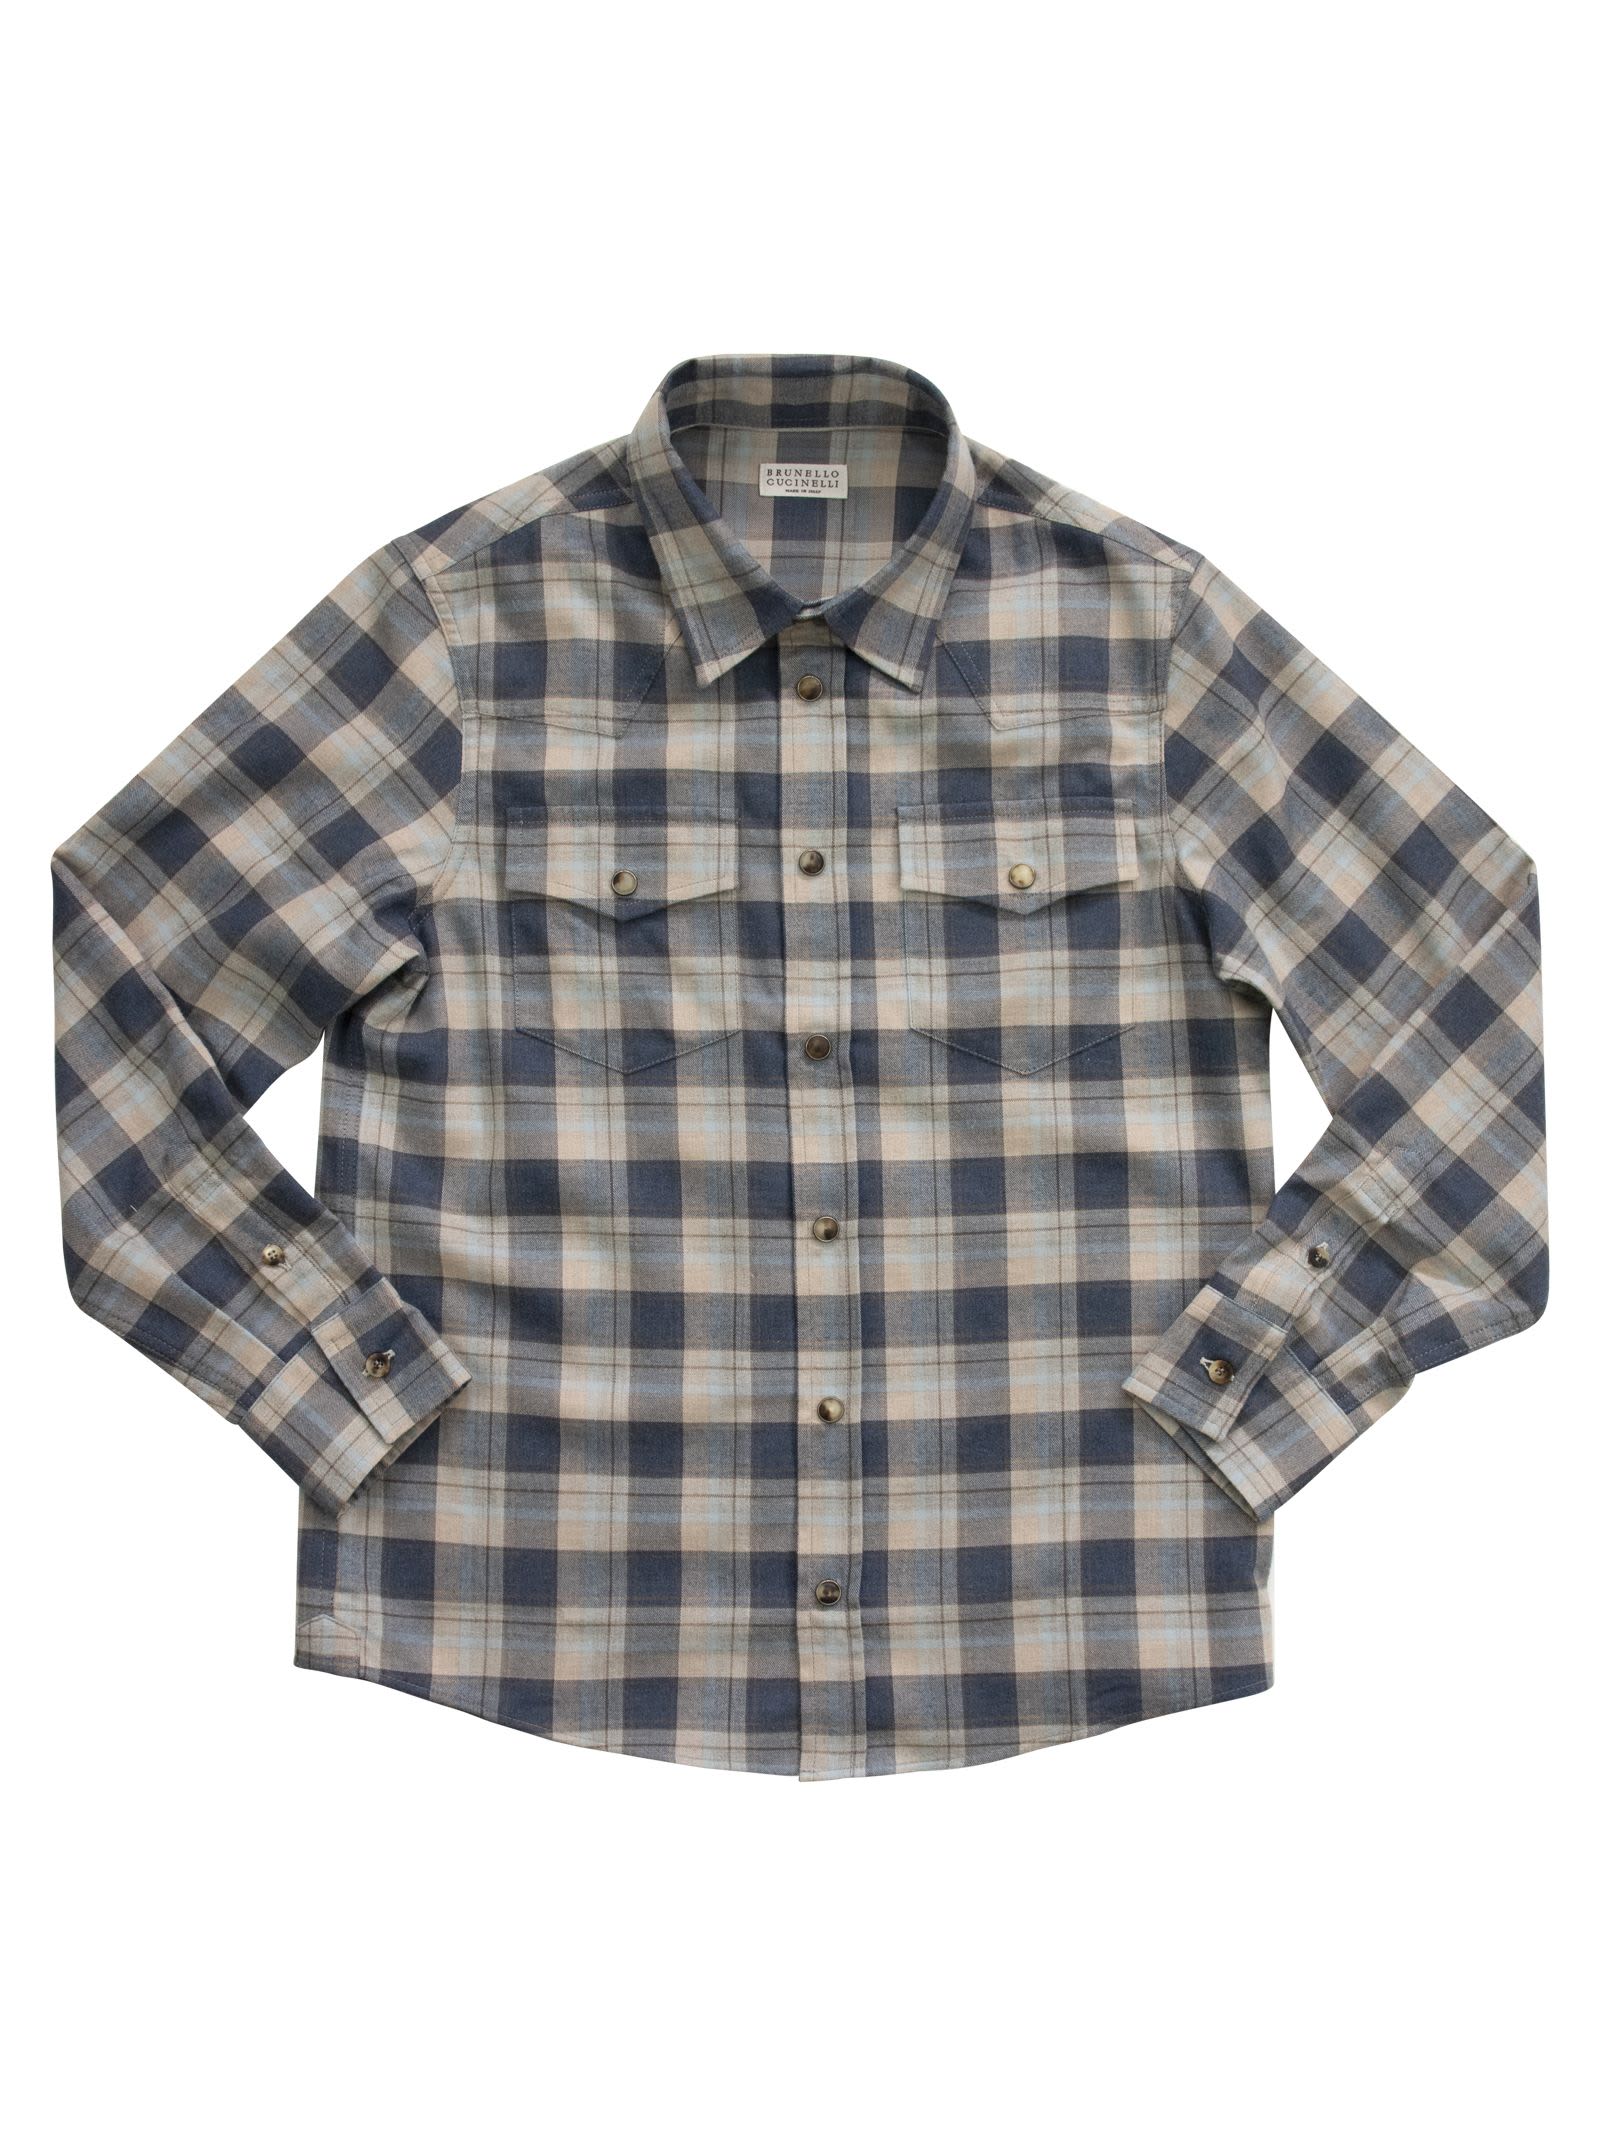 Brunello Cucinelli Madras Flannel Shirt With Snaps And Pockets